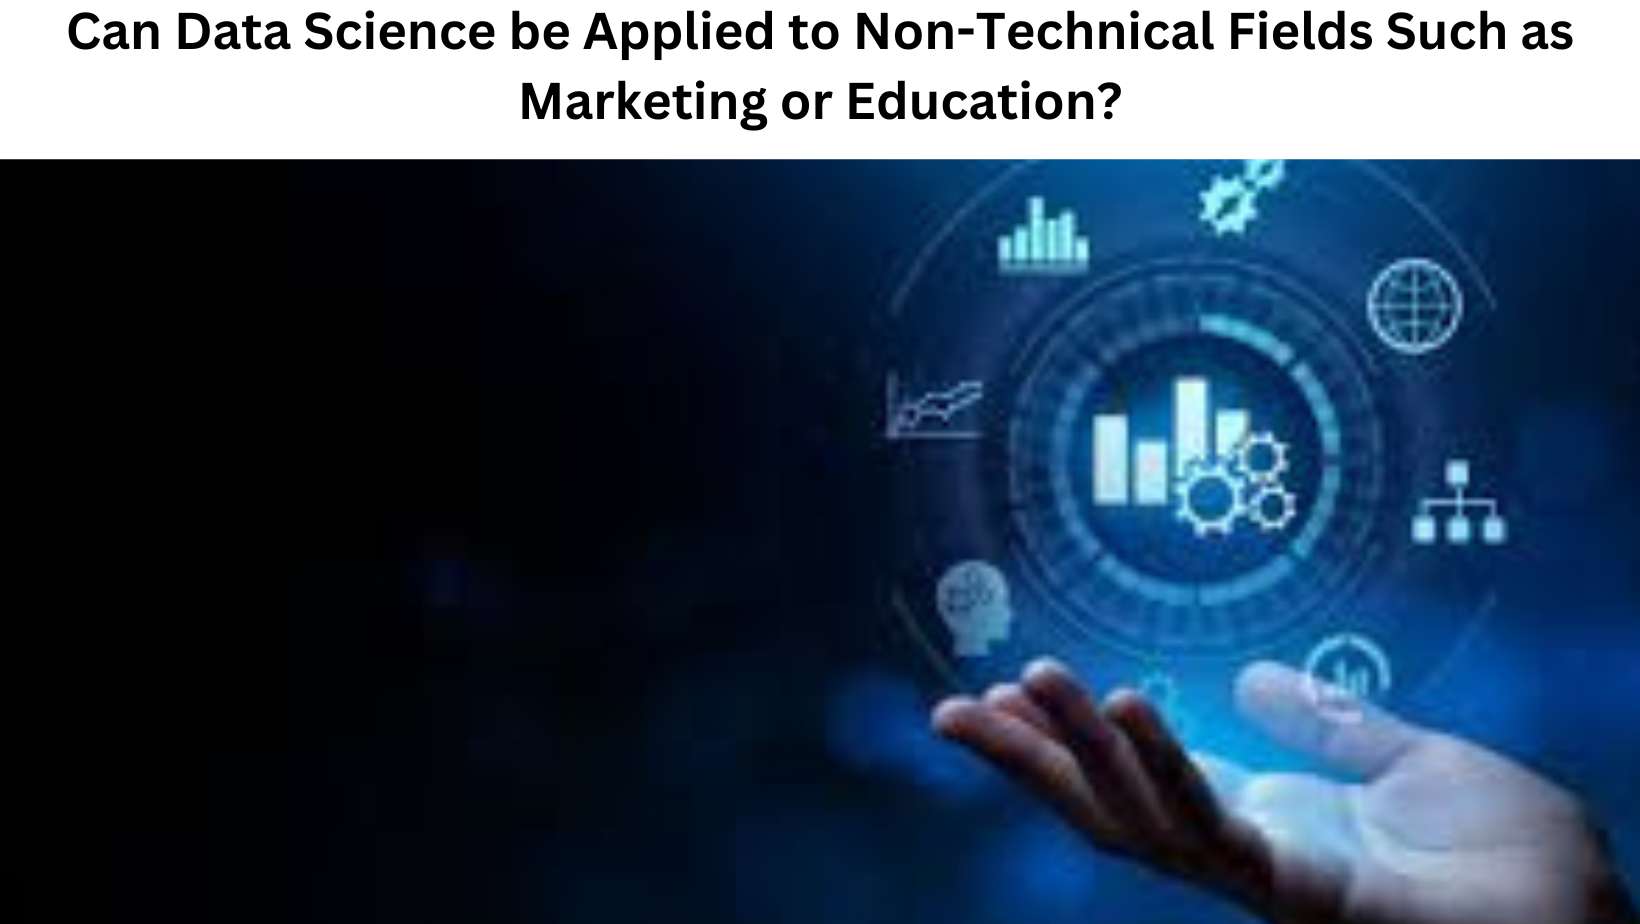 Can Data Science be Applied to Non-Technical Fields Such as Marketing or Education?